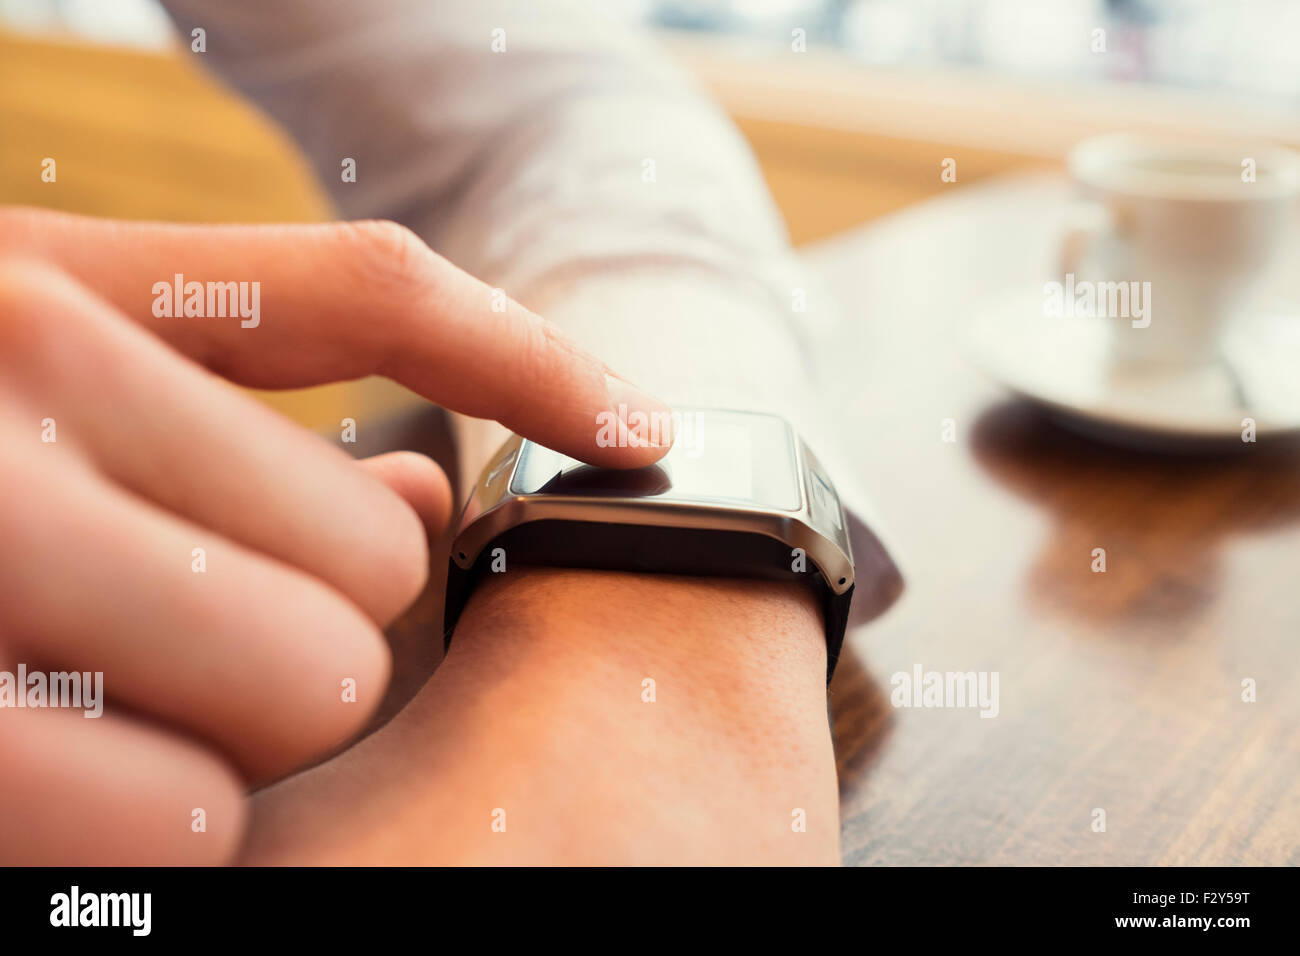 Man in a bar using smart watch. Close-up finger. Vintage filter Stock Photo